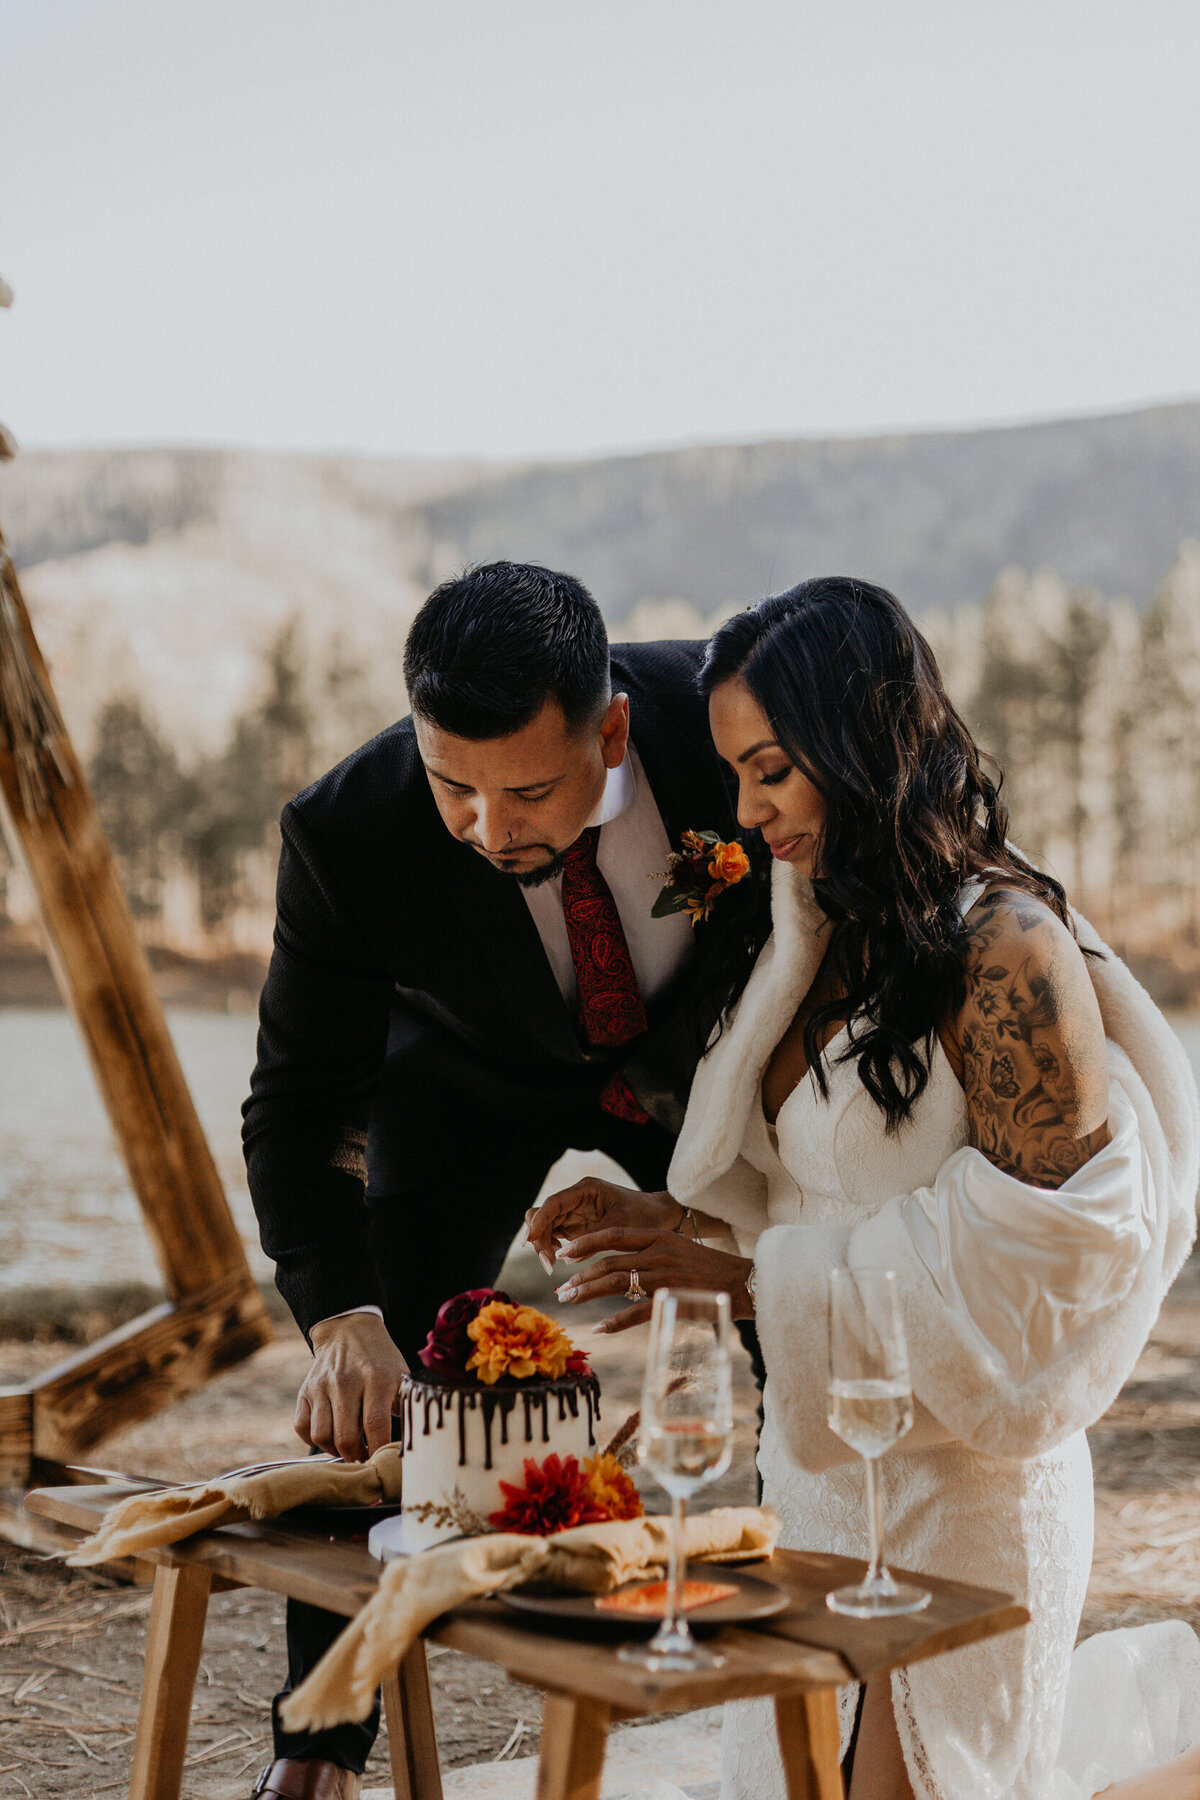 newlyweds cutting cake after their elopement ceremony